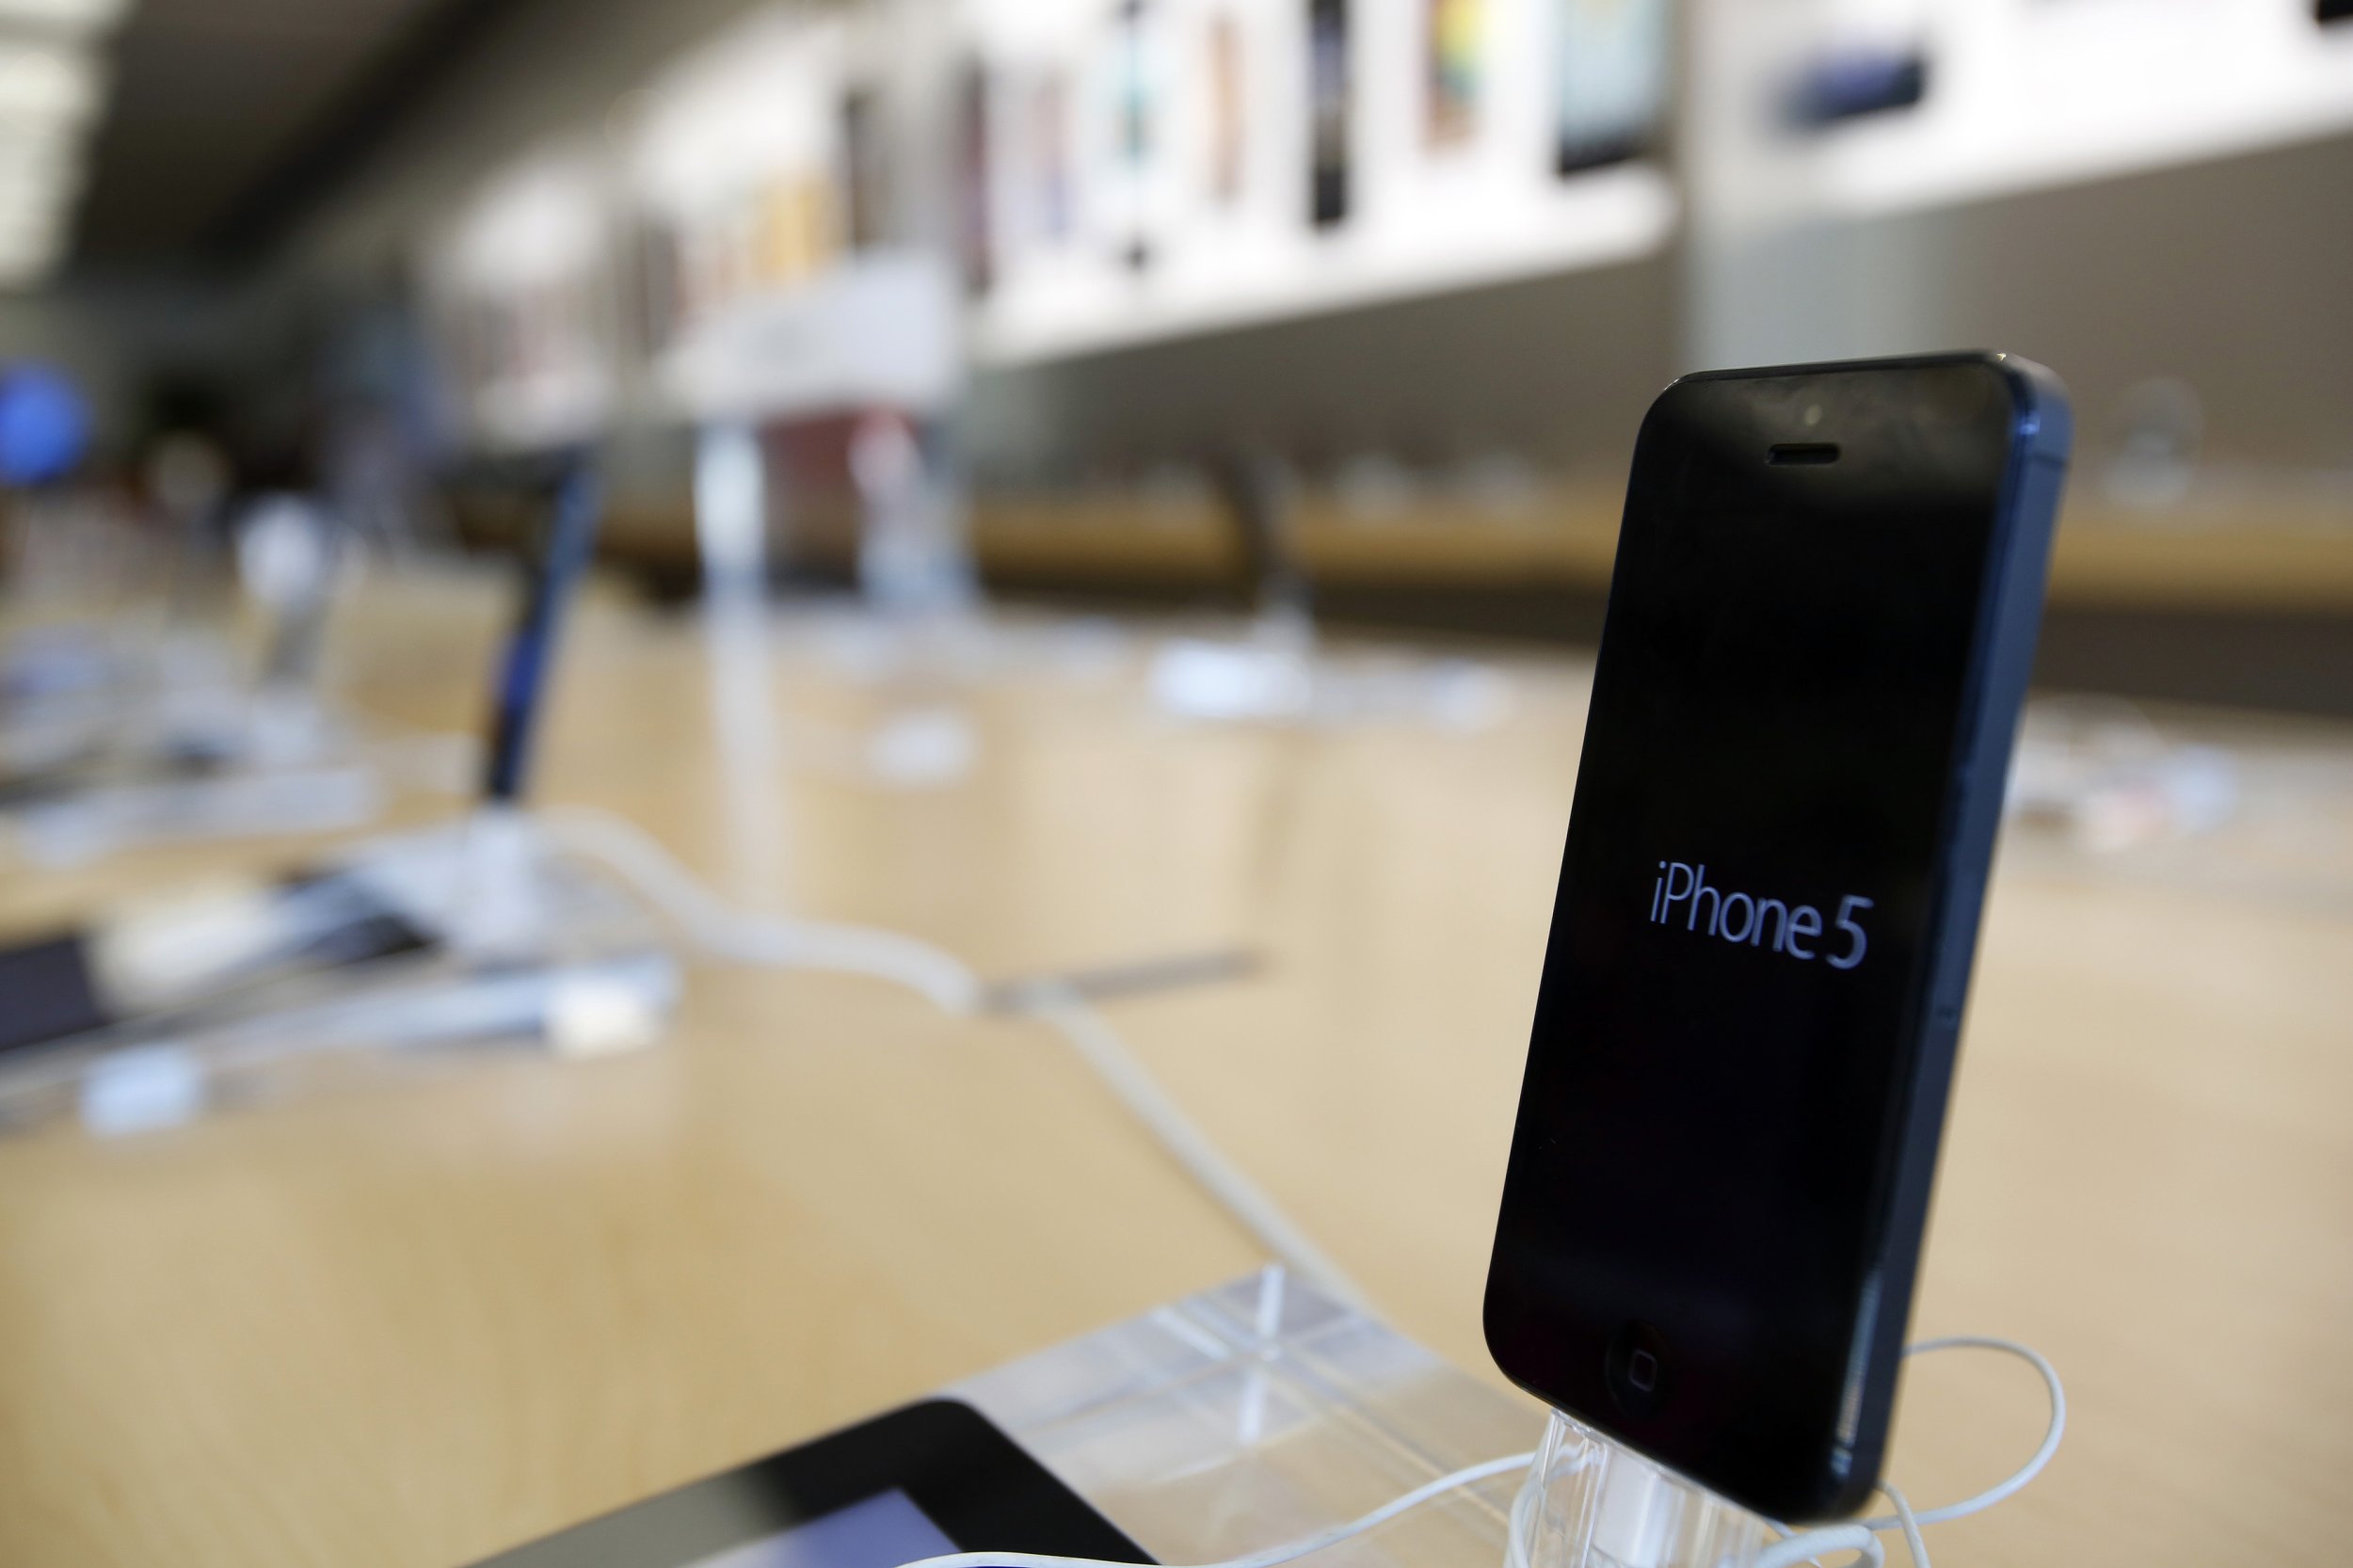 Apple iPhone 5S Release Date In September Hinted At By Q4 Earnings 